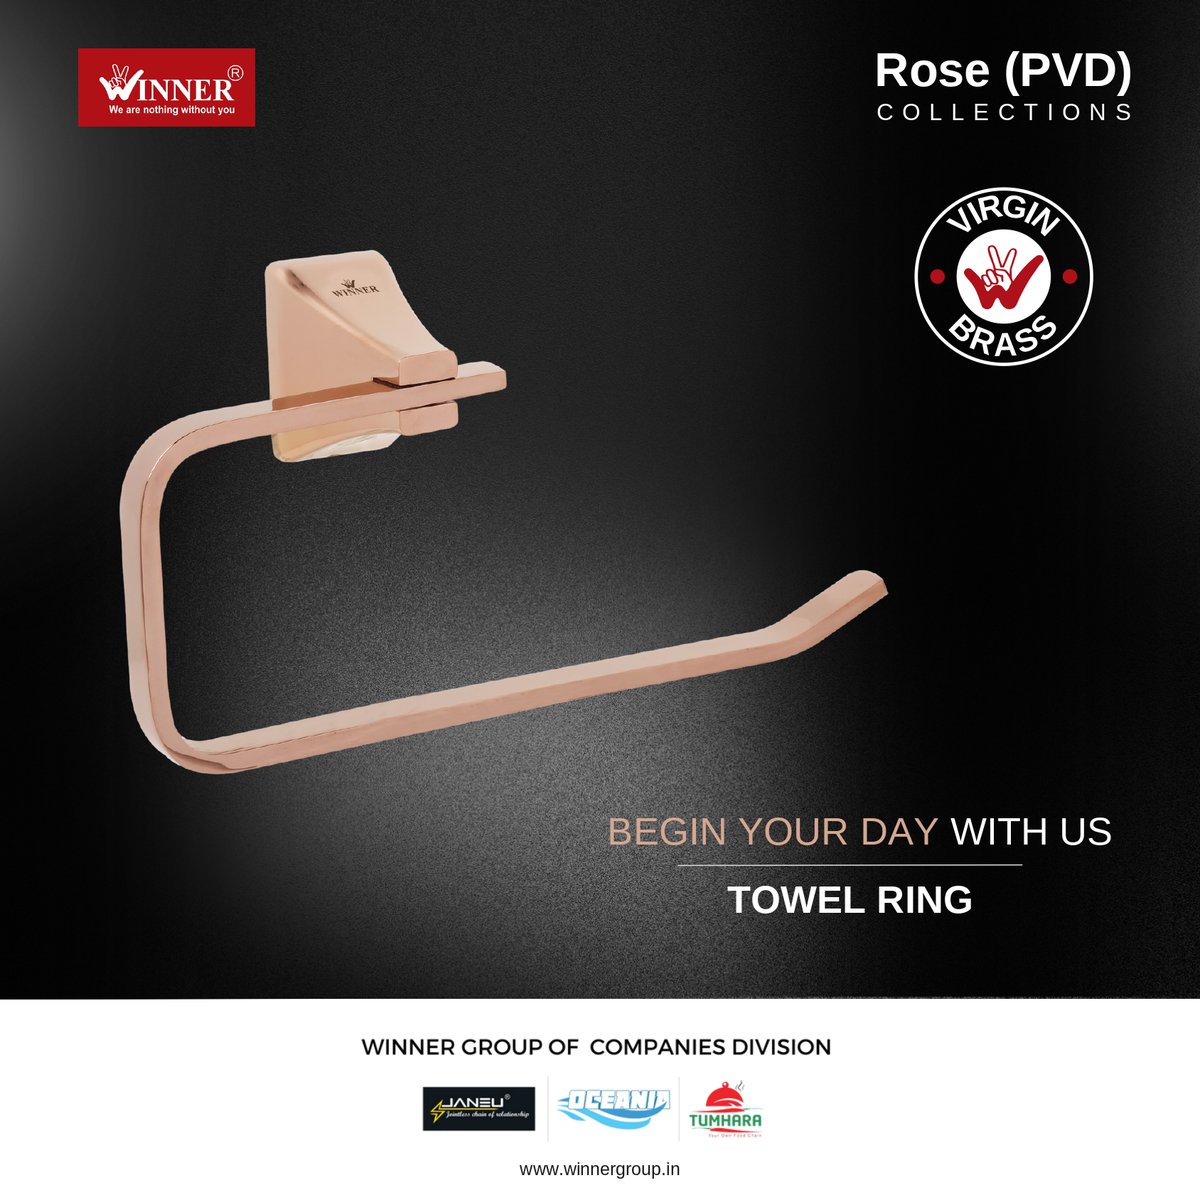 The Rose PVD Towel Ring for the Bathroom is a magnificent addition to your bathroom hardware made of high-quality Virgin Brass. 
.
.
#towelring #virginbrass #winner #luxury #bathroomhardware #premium  #towelring  #decor #towelrack #bathroomdesign